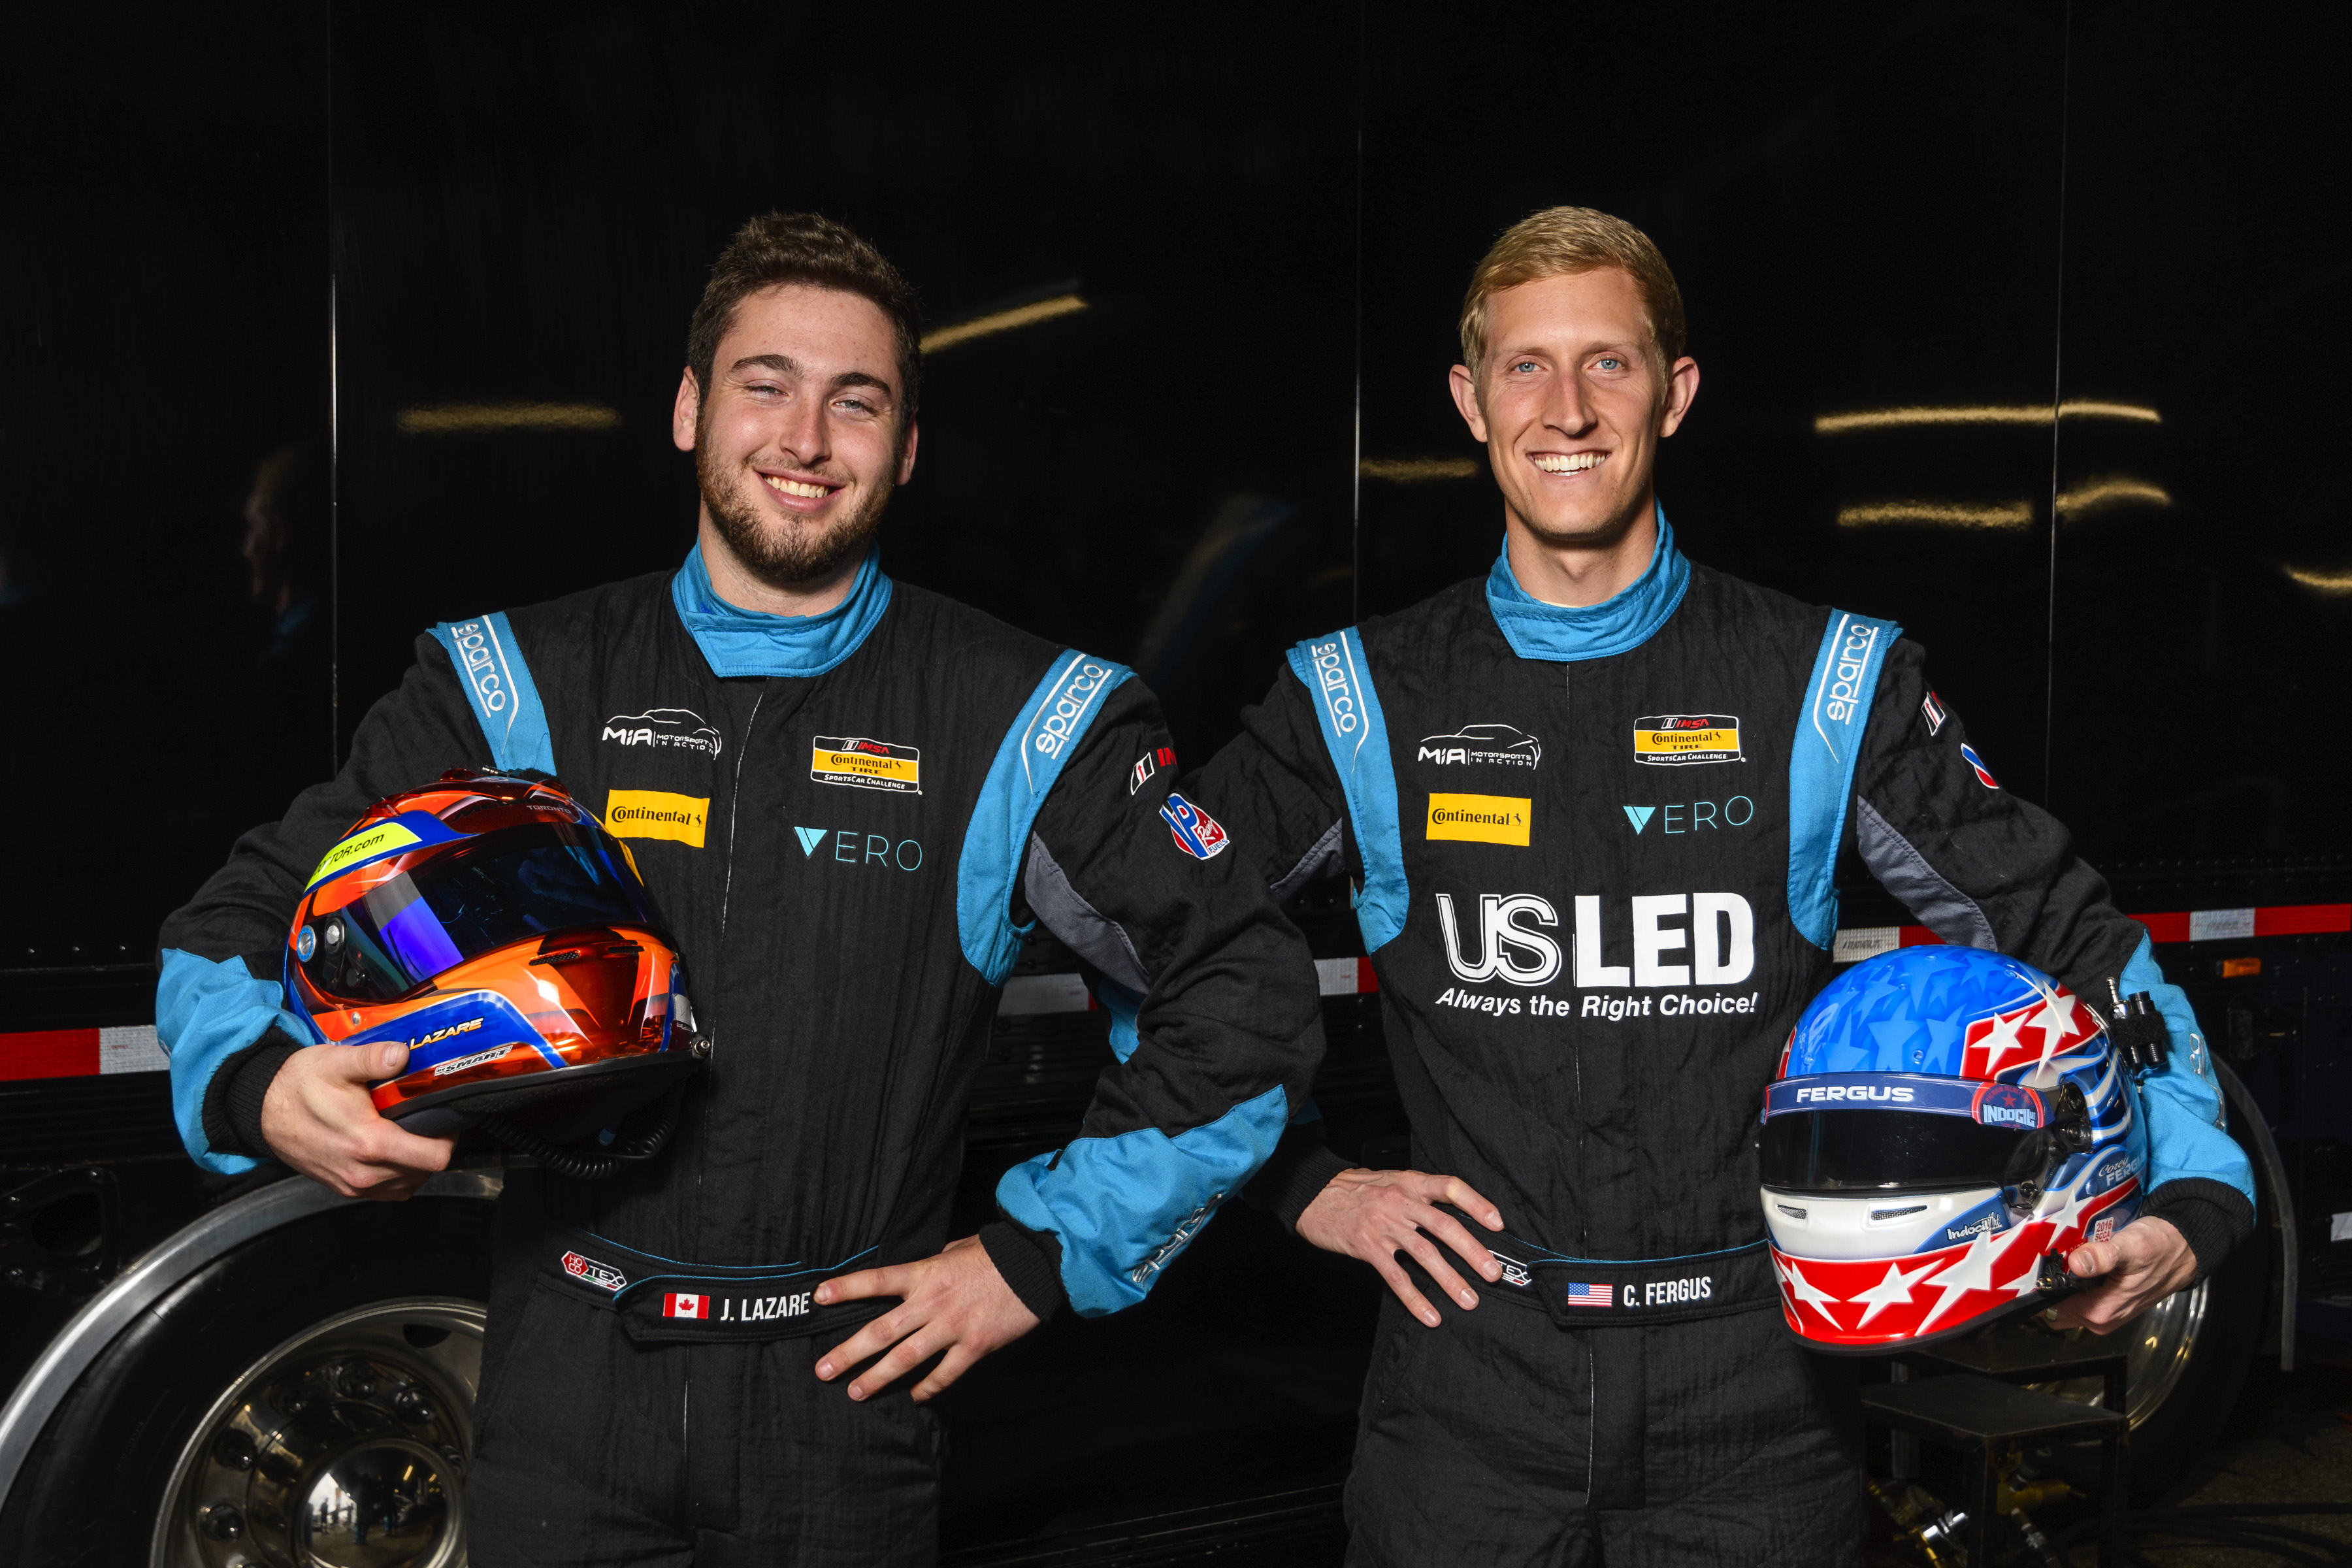 Motorsports In Action Announces Its Driver Line-up For The 2018 Season